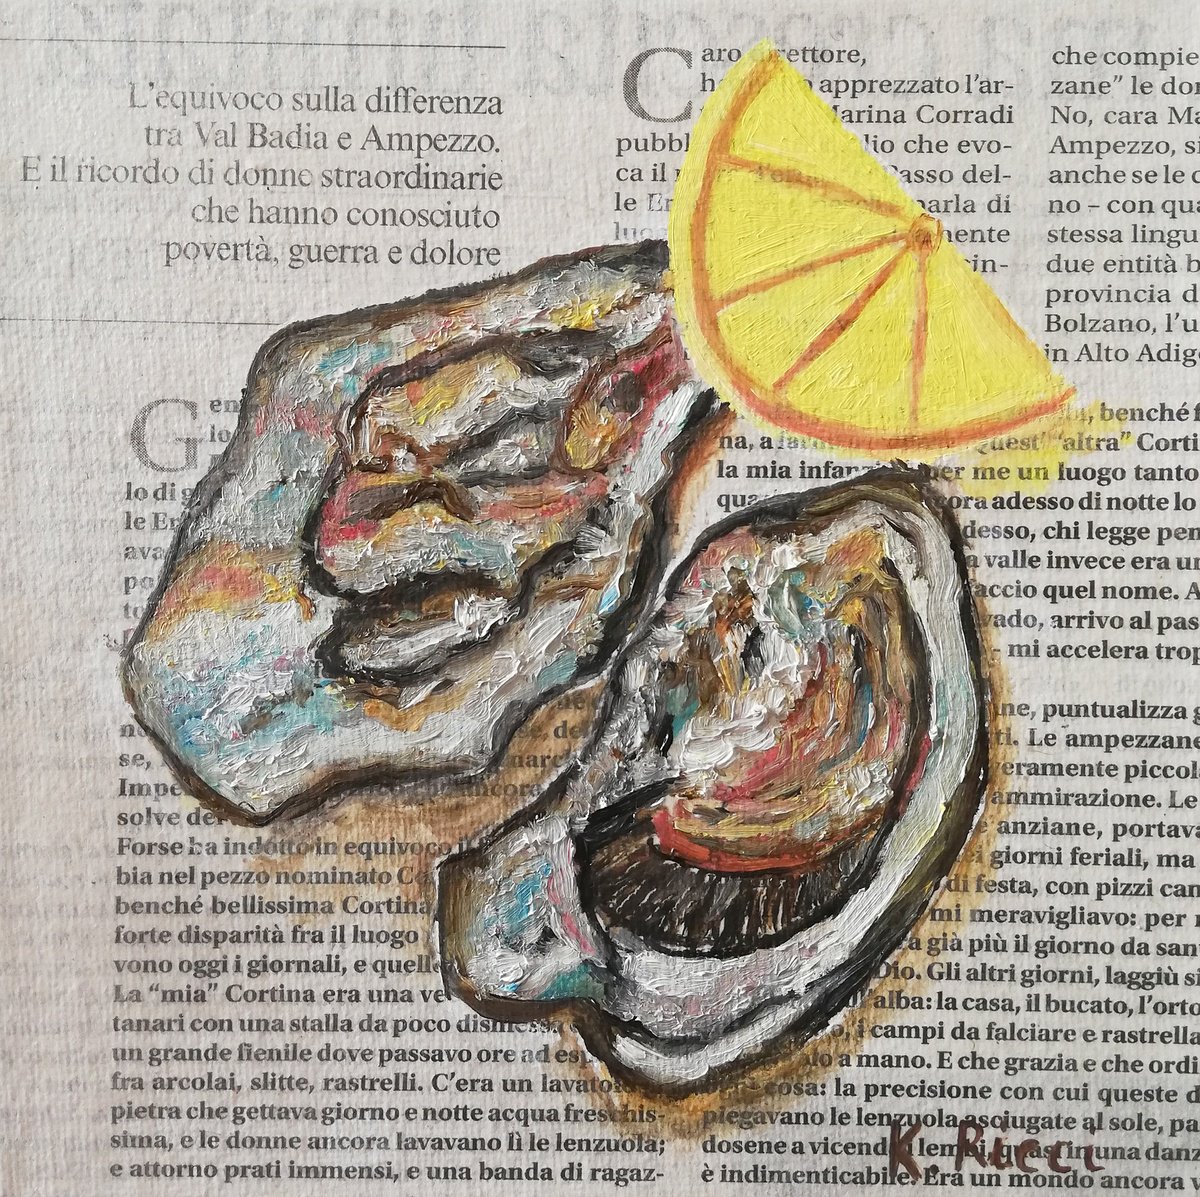 Oysters on Newspaper Original Oil on Canvas Board Painting 6 by 6 inches (15x15 cm) by Katia Ricci